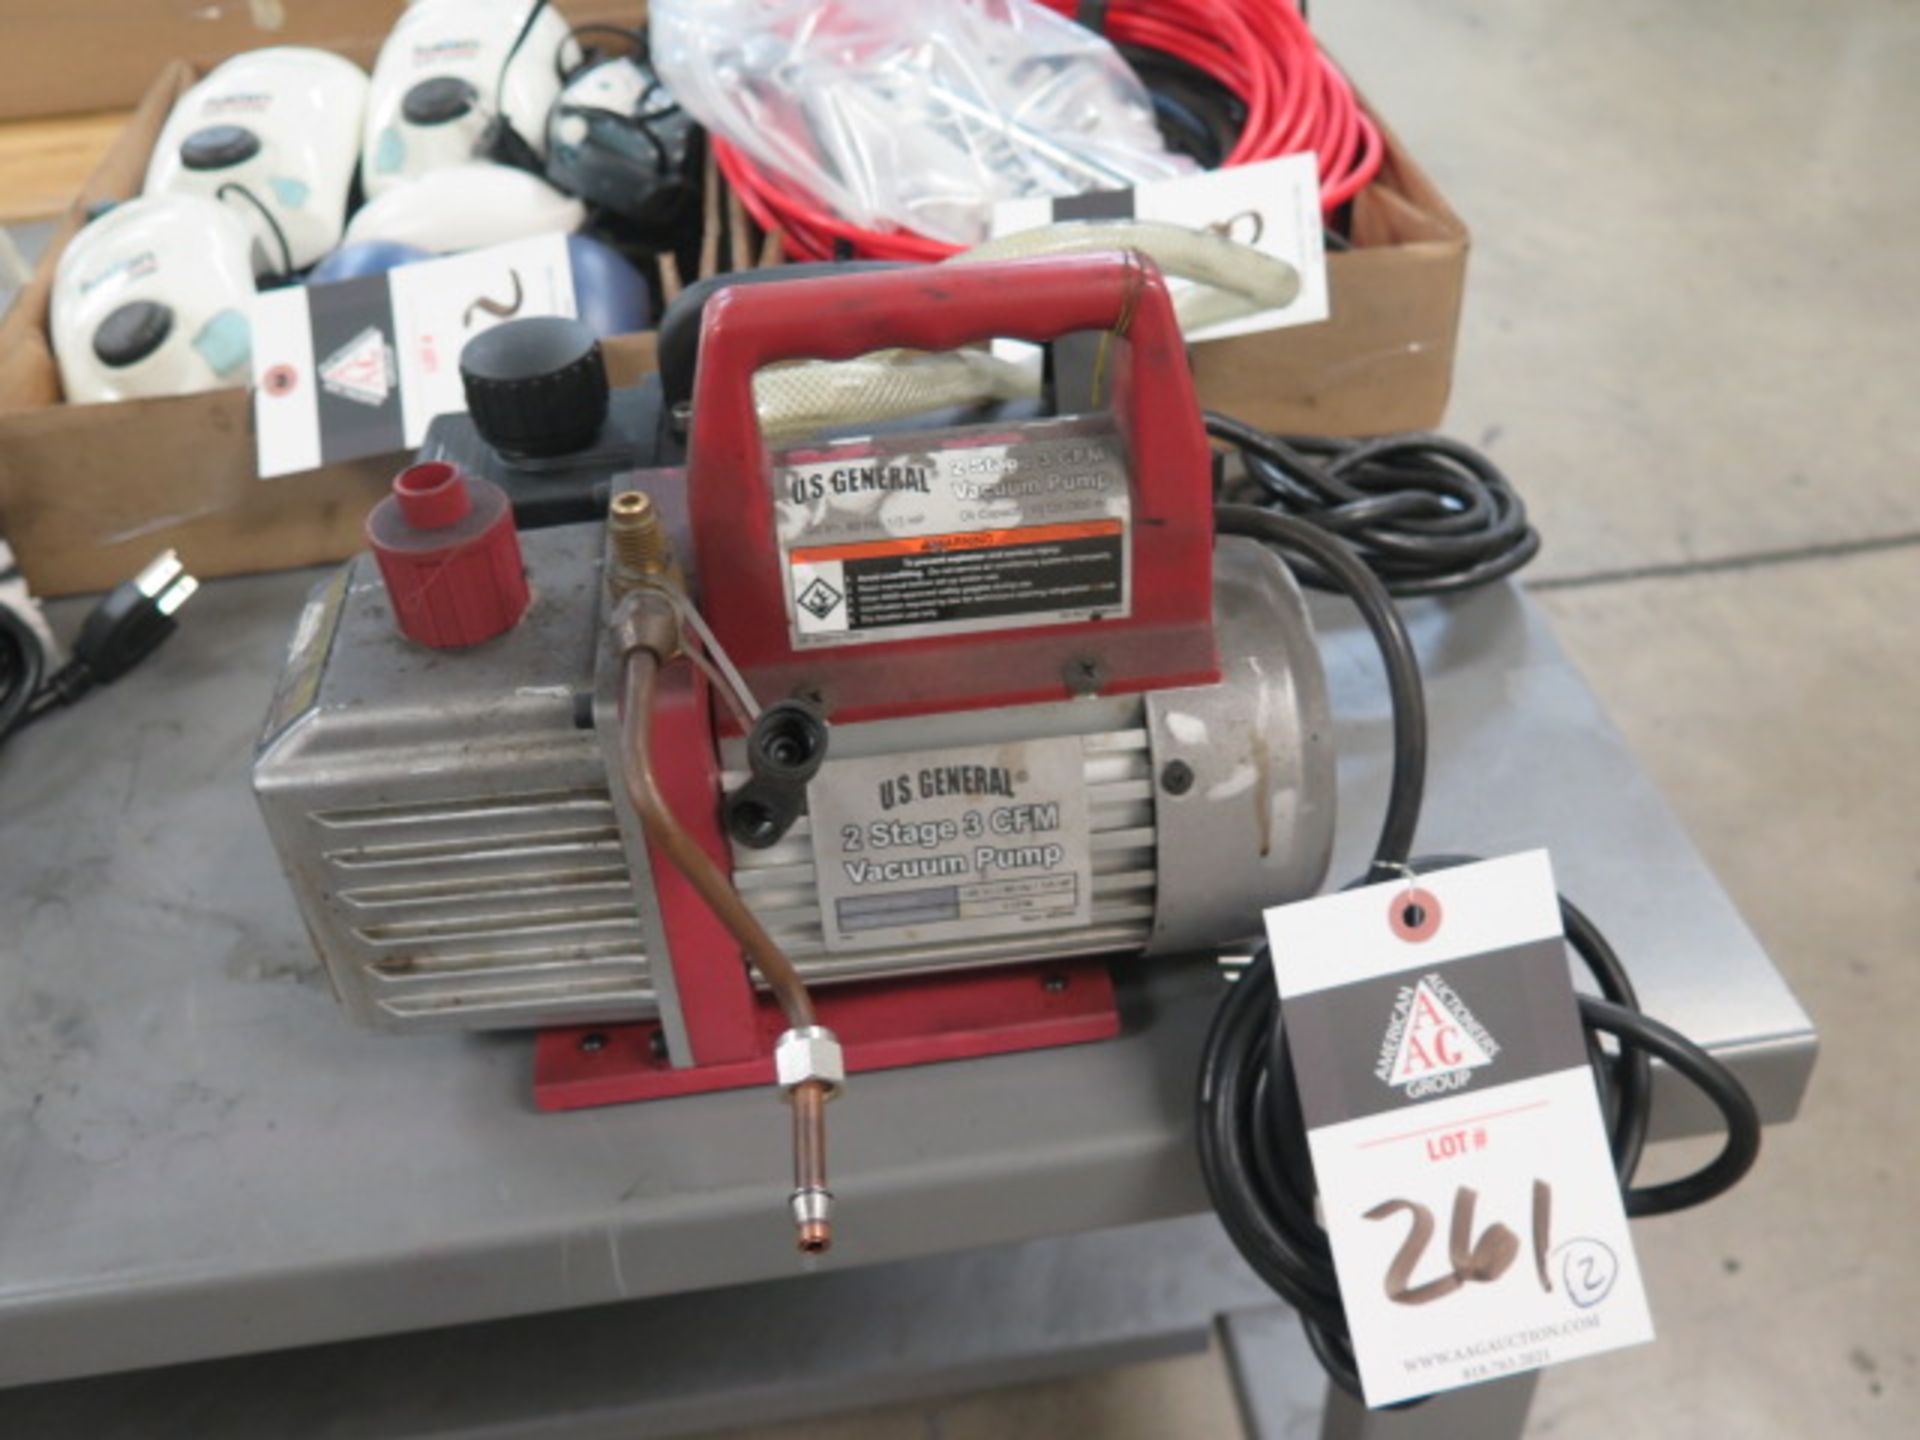 Vacuum Pumps (2), SOLD AS IS AND WITH NO WARRANTY